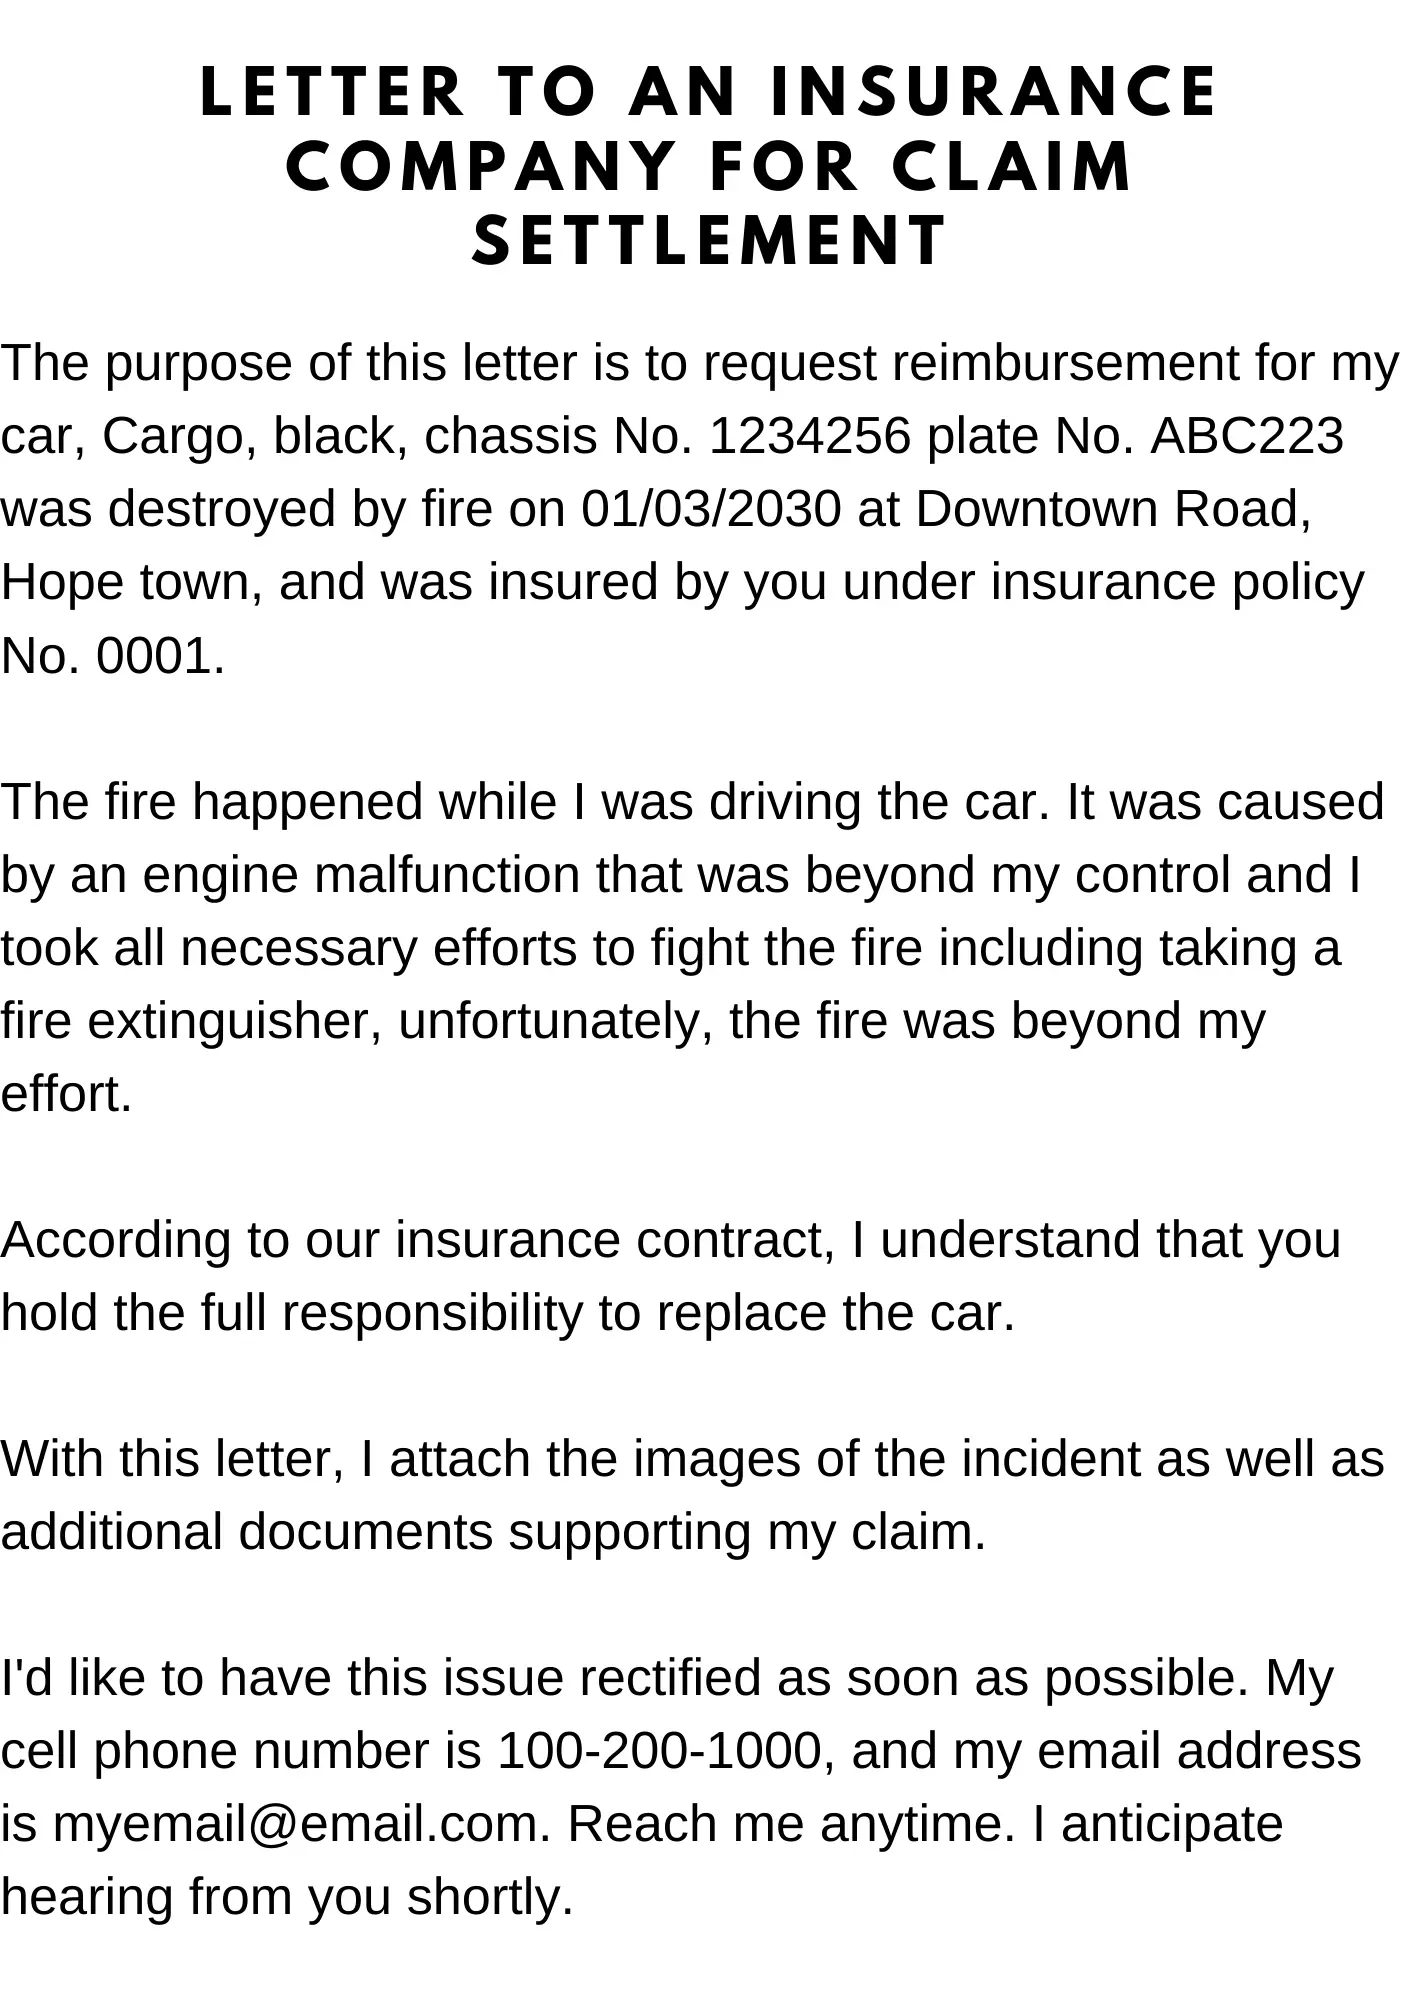 letter to an insurance company for claim settlement, sample letter to an insurance company for claim settlement, letter to insurance company for damage claim, letter to insurance company for claim 